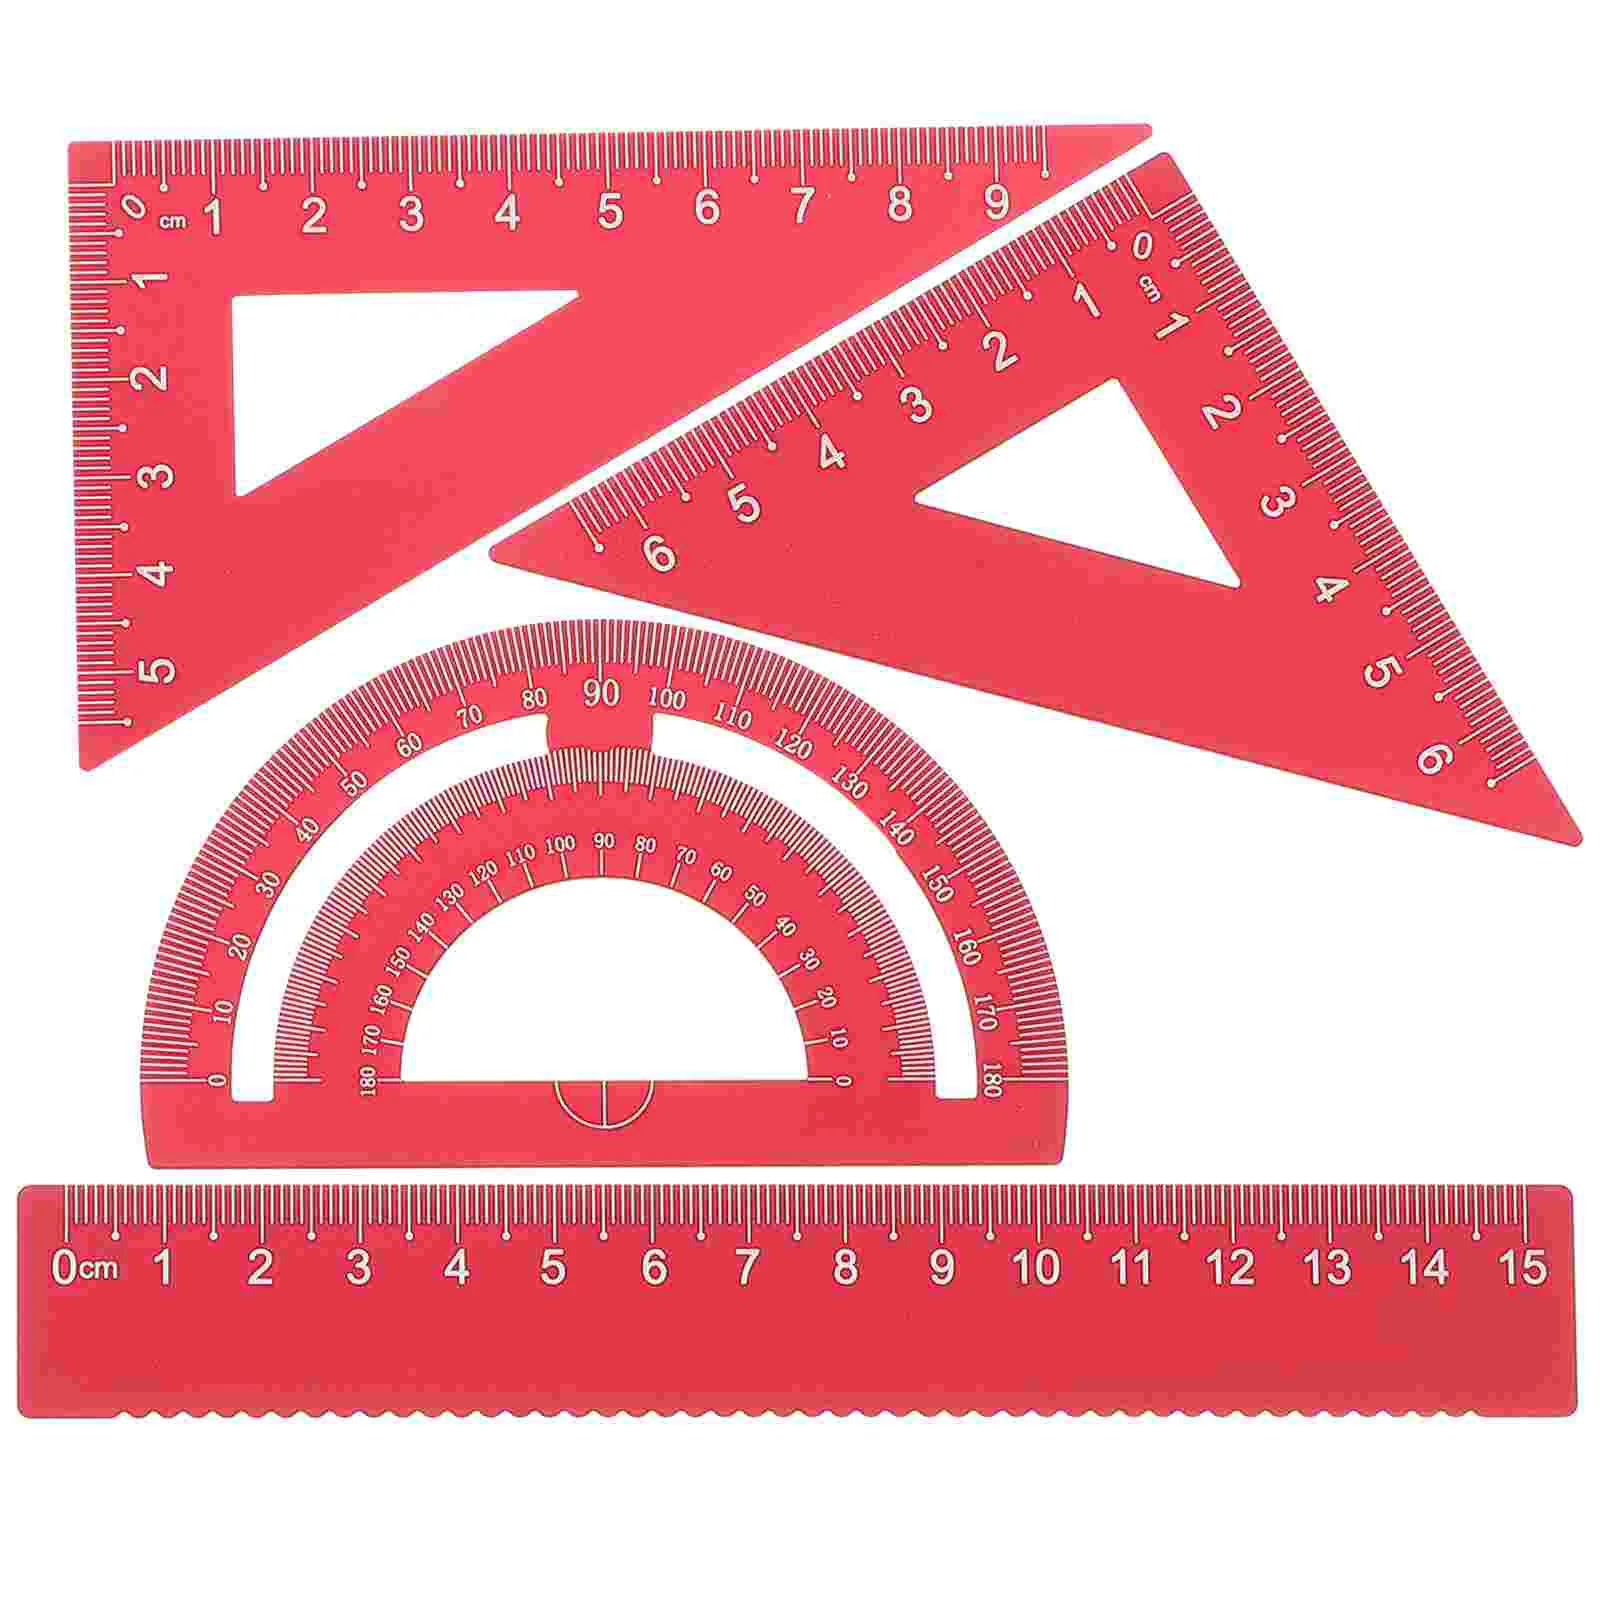 4 Pack Geometry Set Metal Triangle Ruler Protractor Straight Ruler Tool Set Math Protractor School and Office Supplies for Kids deli 79515 ruler 4 pcs set straight ruler protractor students math geometry plastic triangle rulers set kids stationery gift